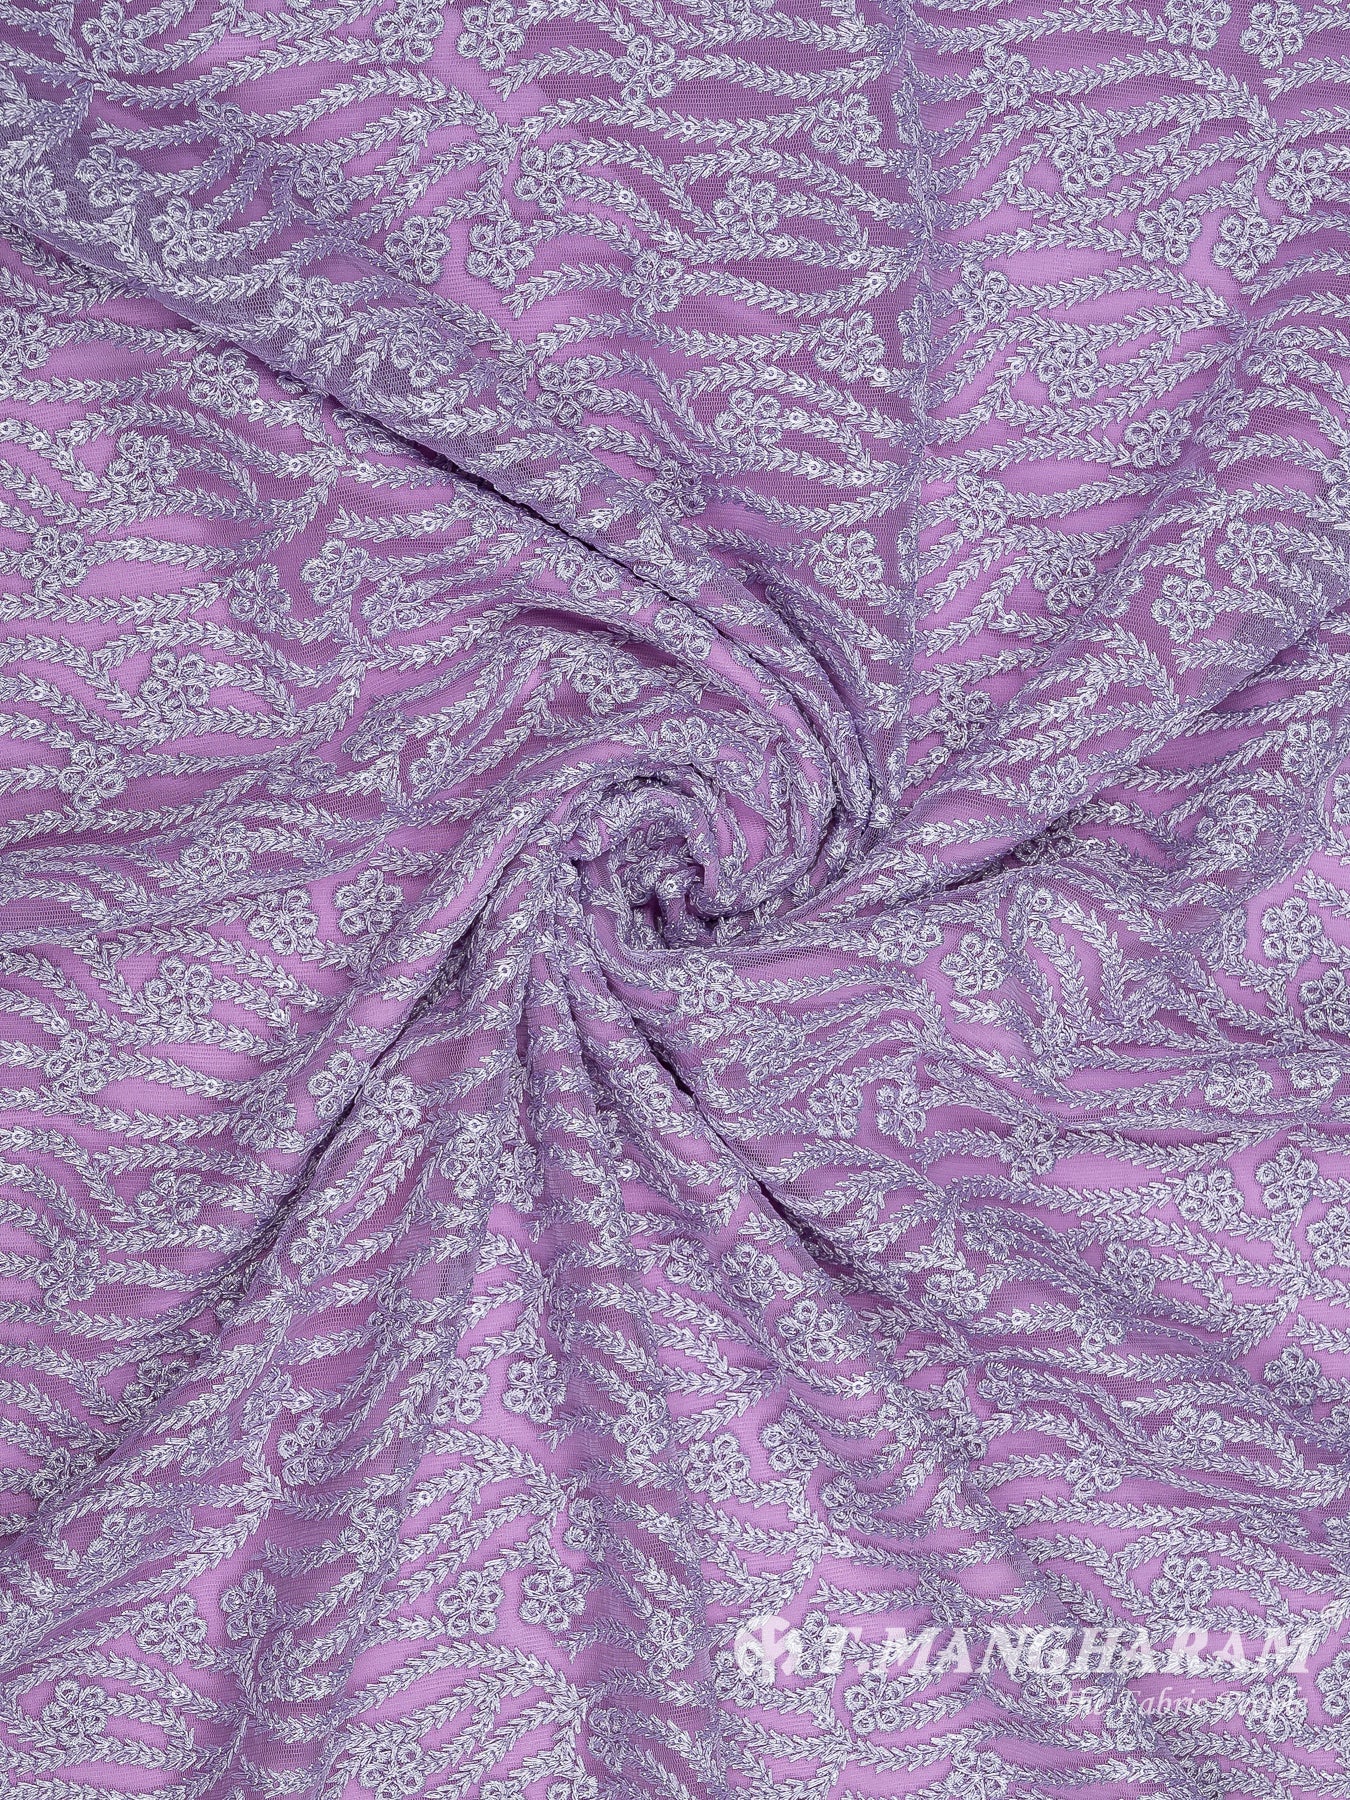 Violet Net Embroidery Fabric - EC8432 view-1